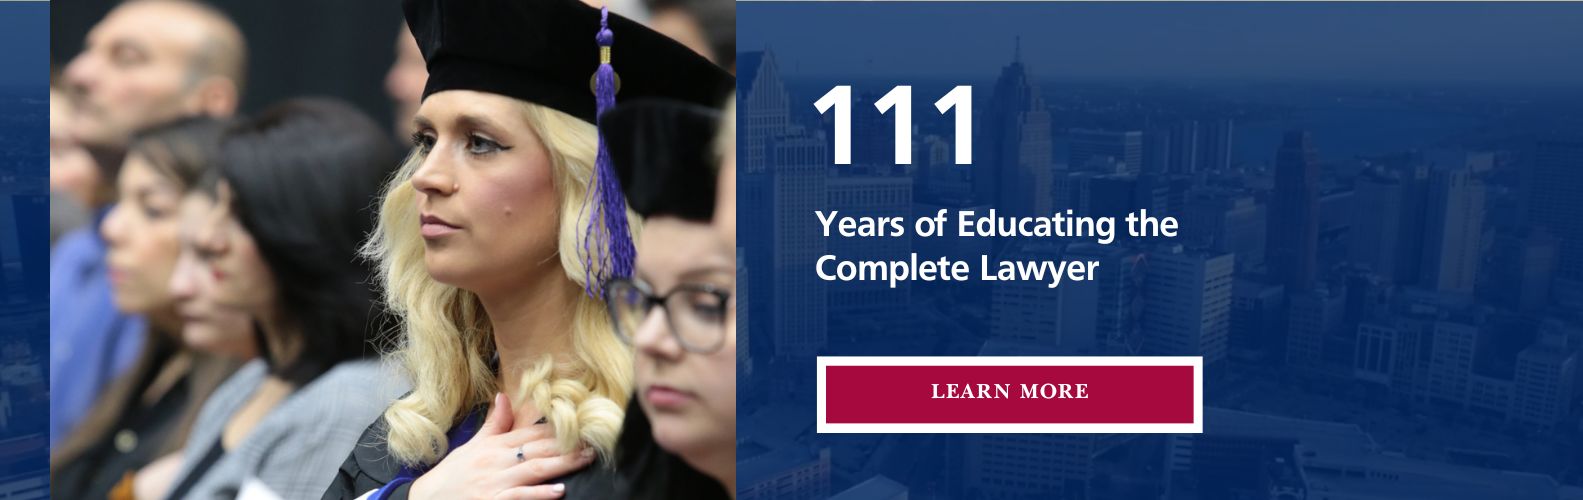 110 years of educating the complete lawyer